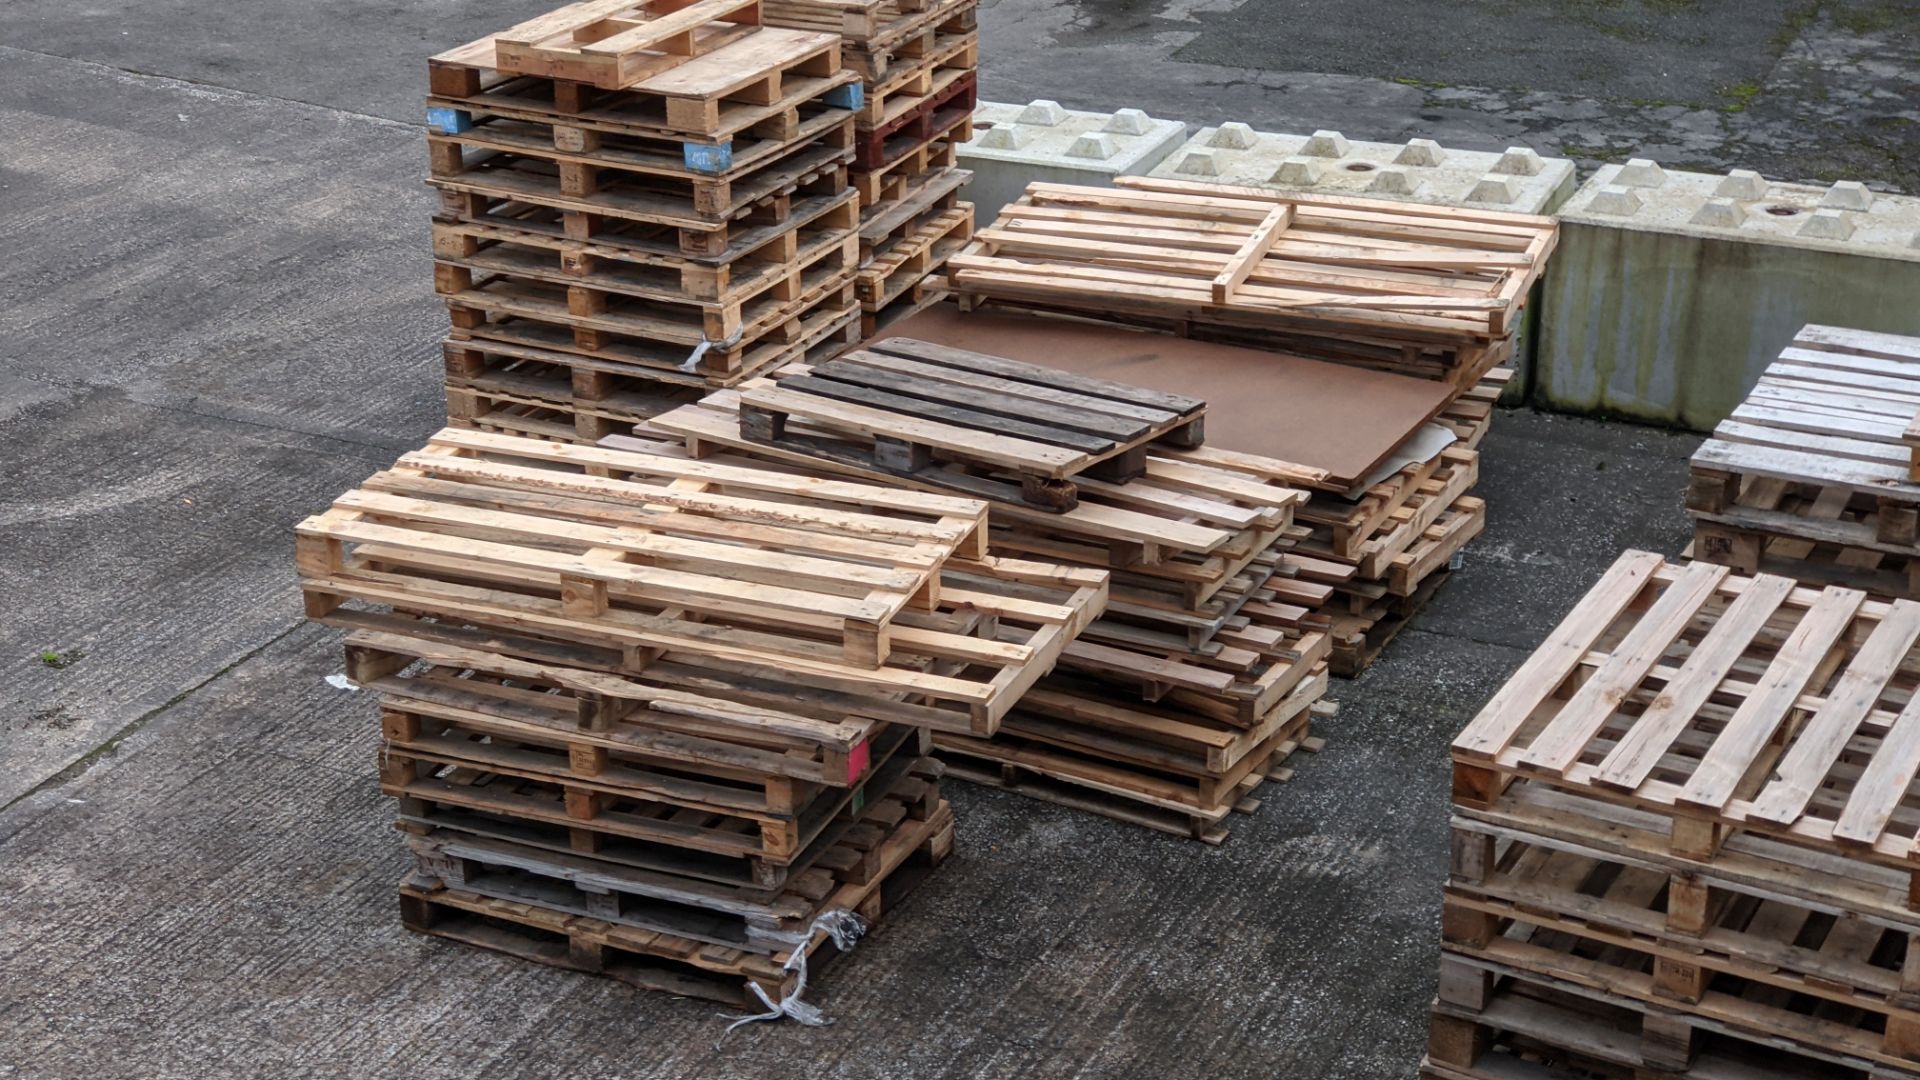 11 stacks of pallets, including regular size, euros, odd sizes and damaged. Approx 9-10 pallets per - Image 6 of 9